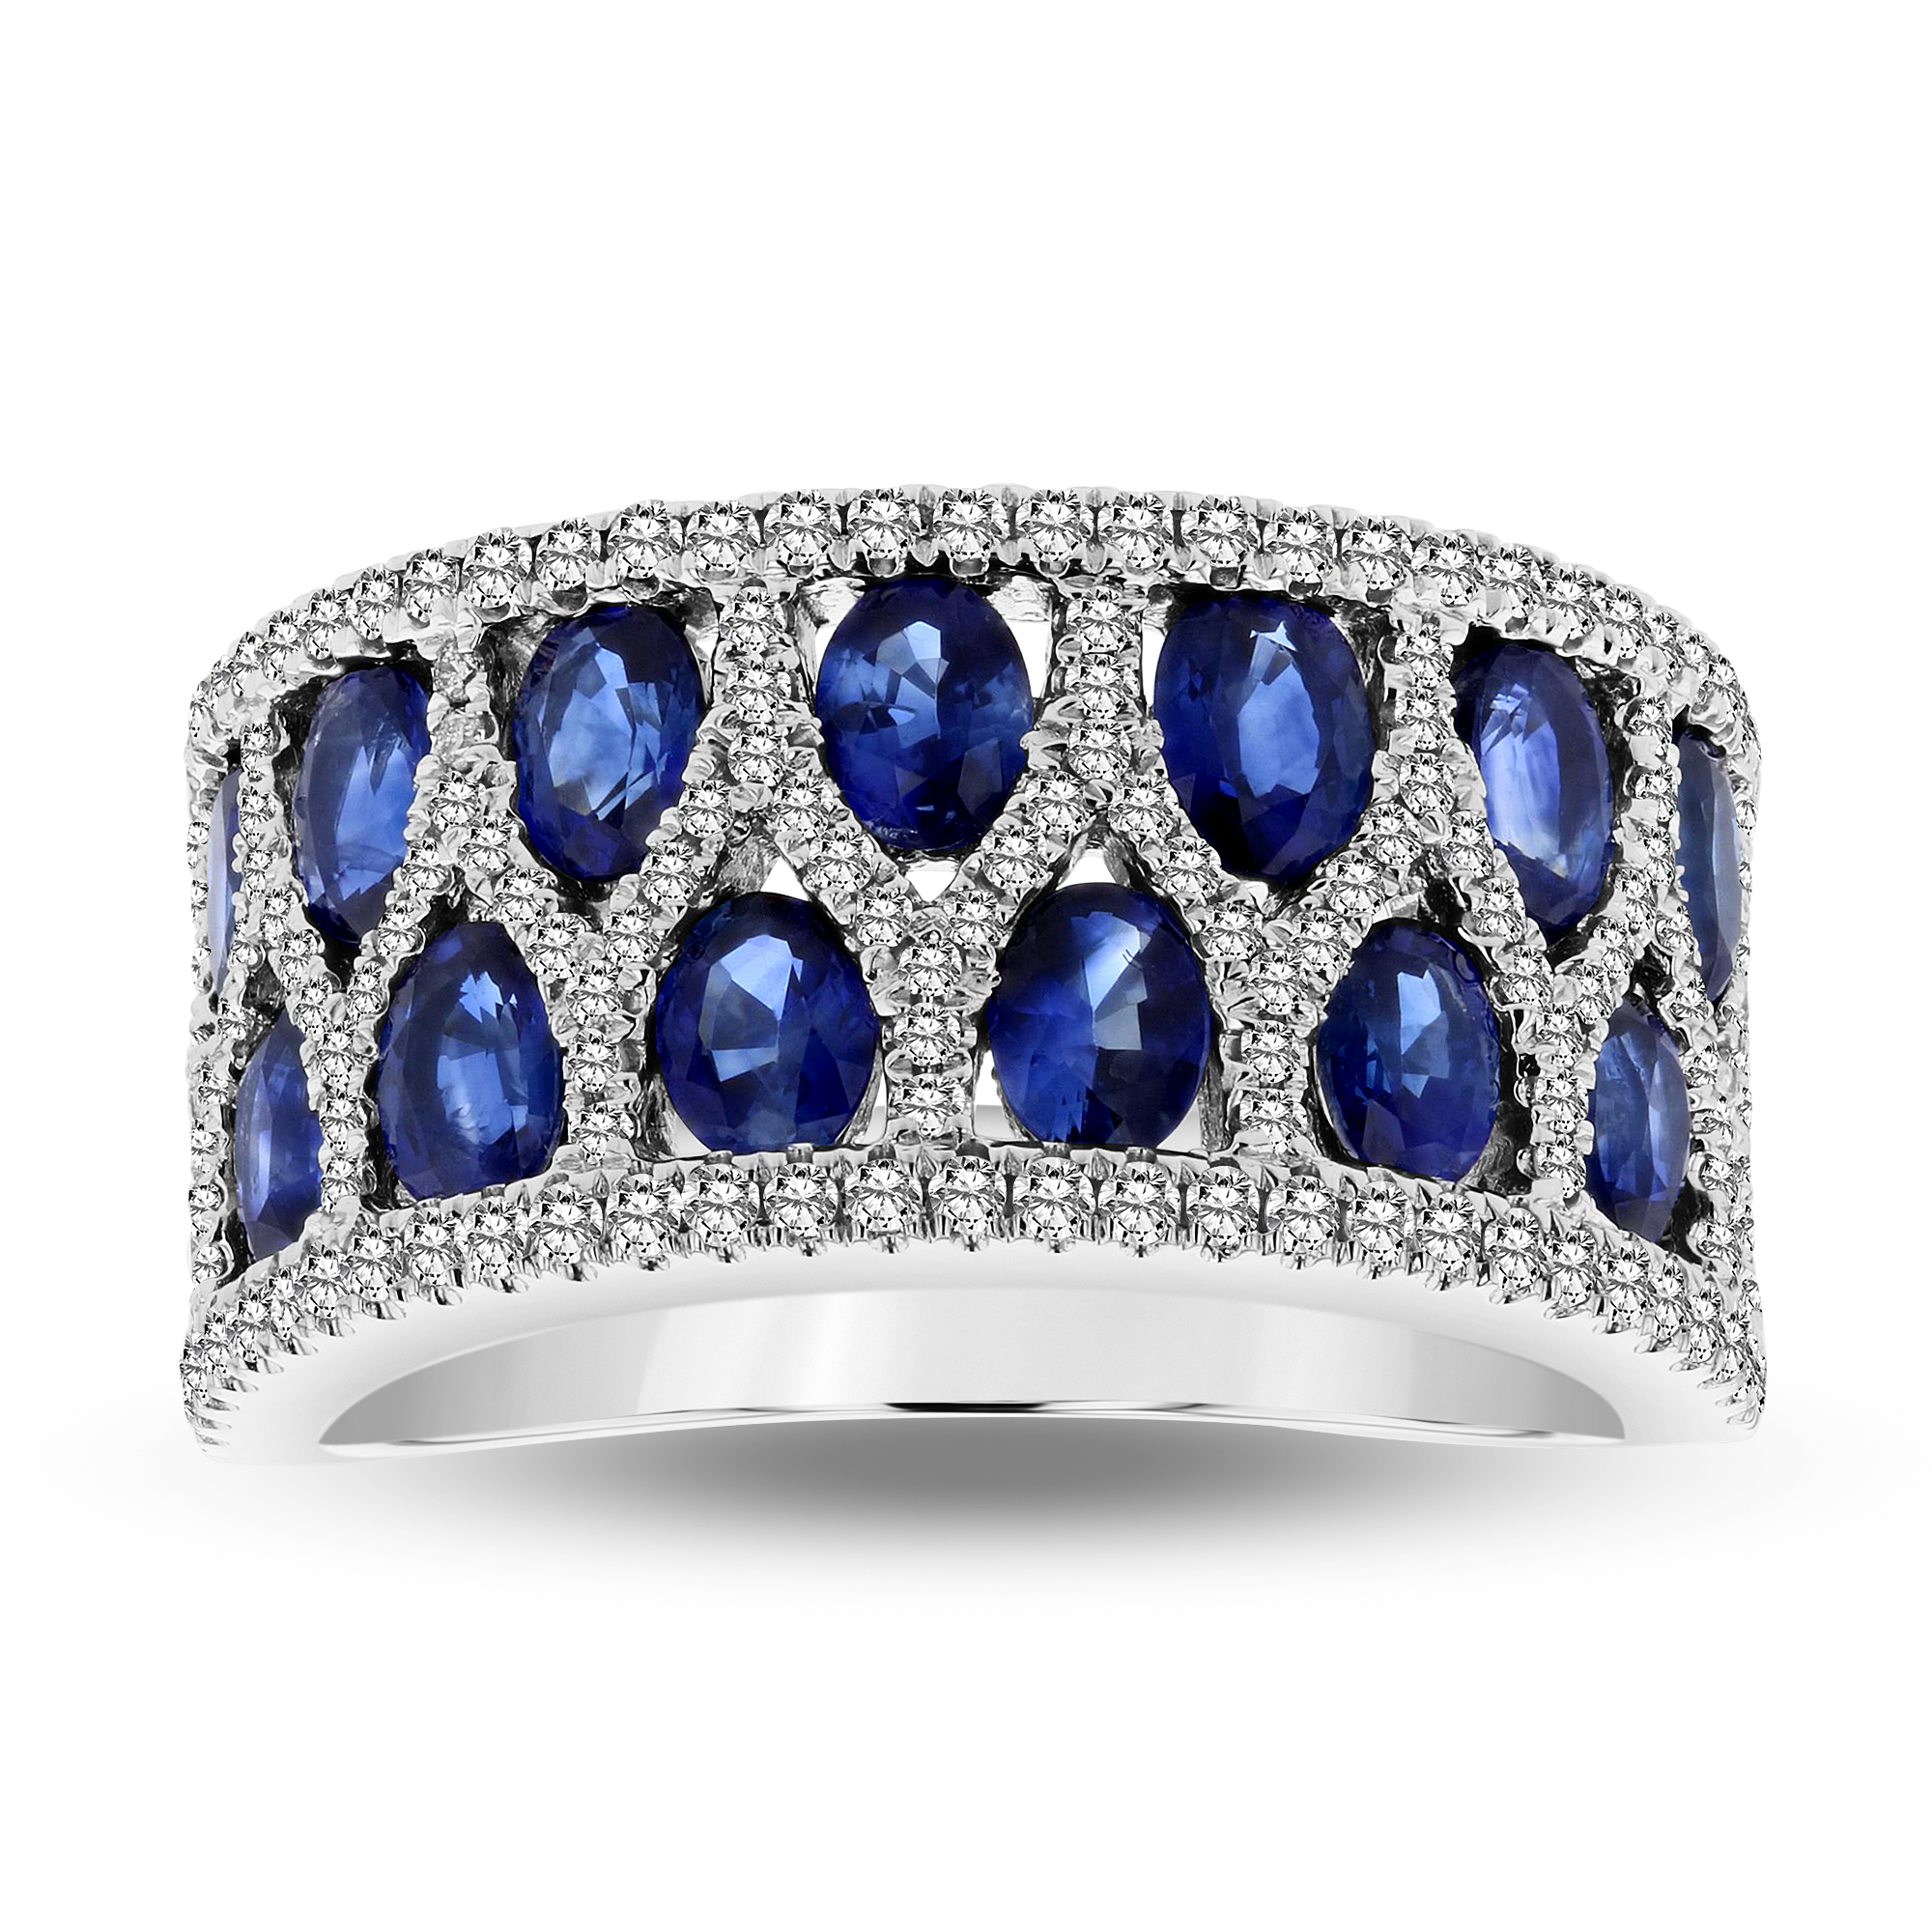 View 3.35ctw Diamond and Sapphire Ring in 18k White Gold